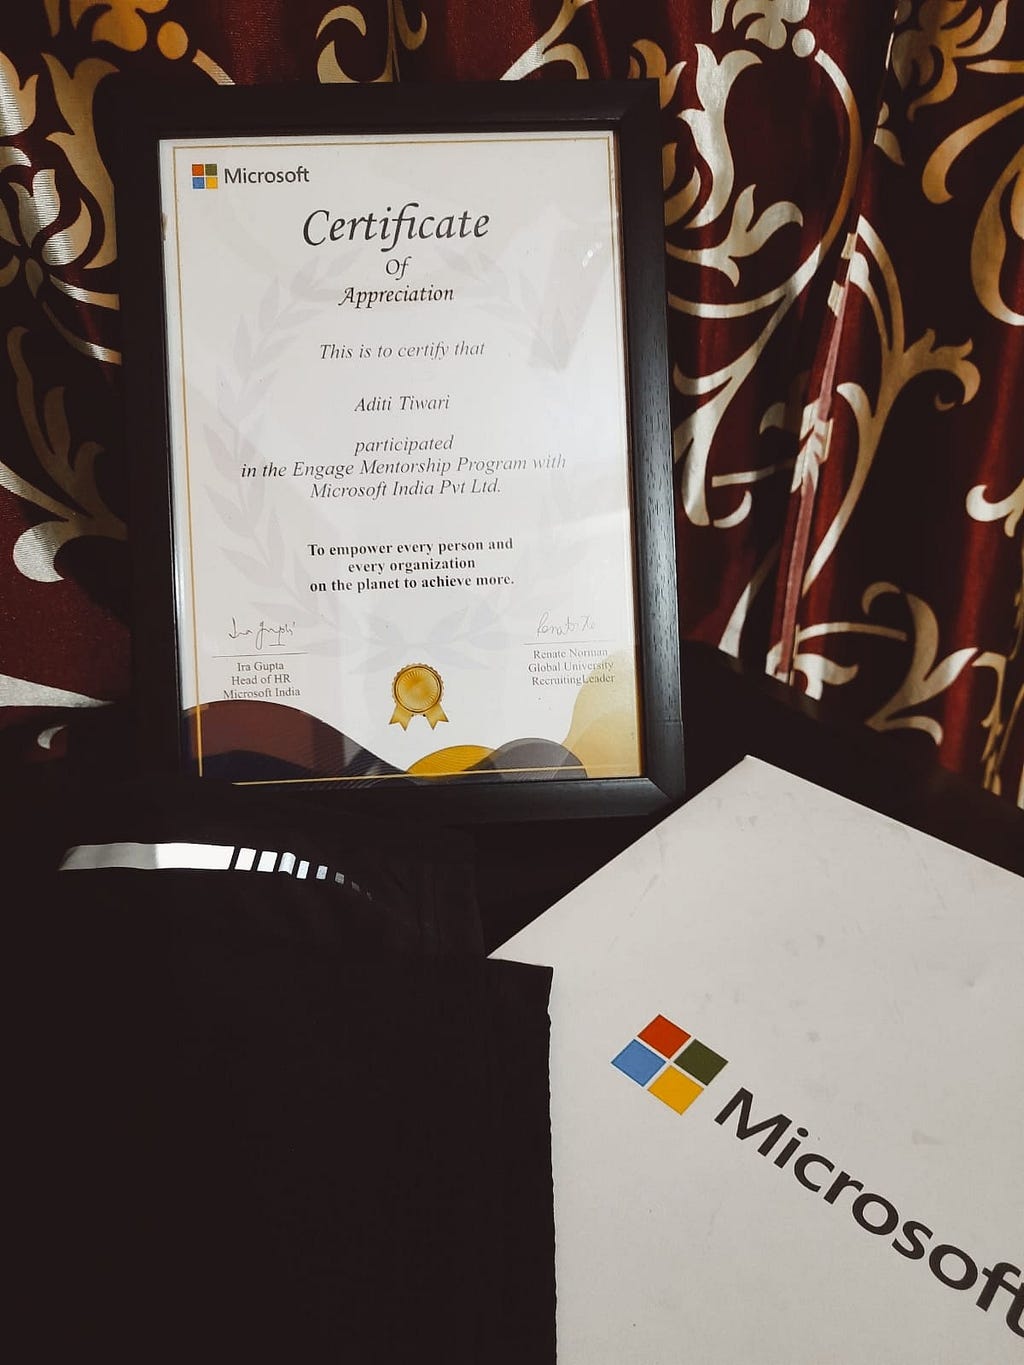 Certificate and T-shirt from Microsoft